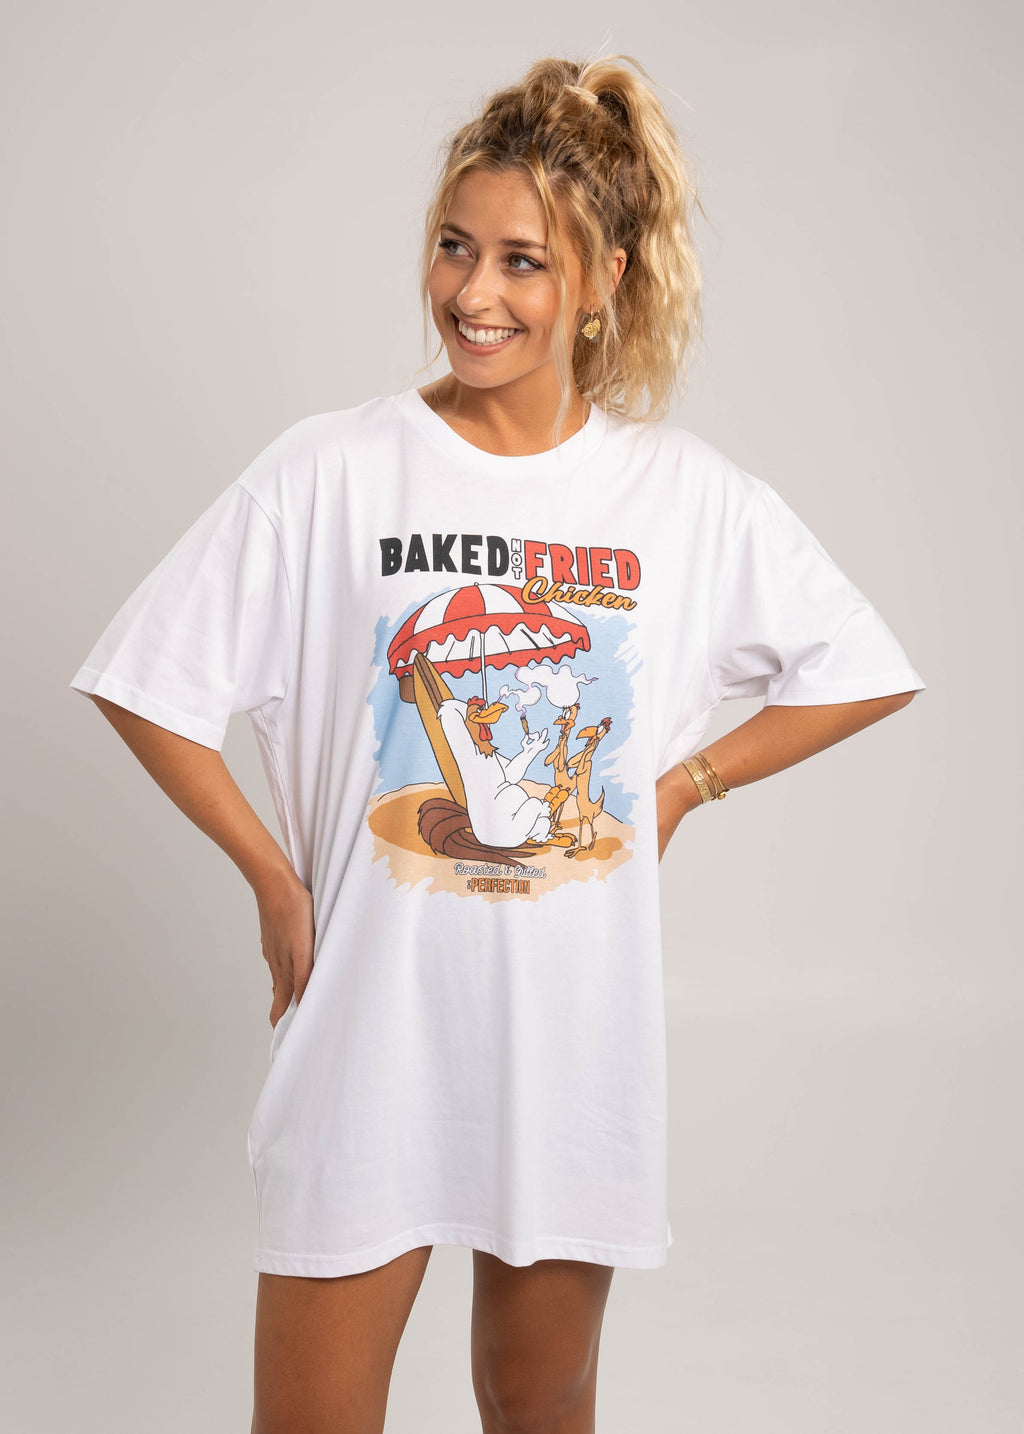 Dr.Moose Byron Bay Baked Not Fried T-Shirt